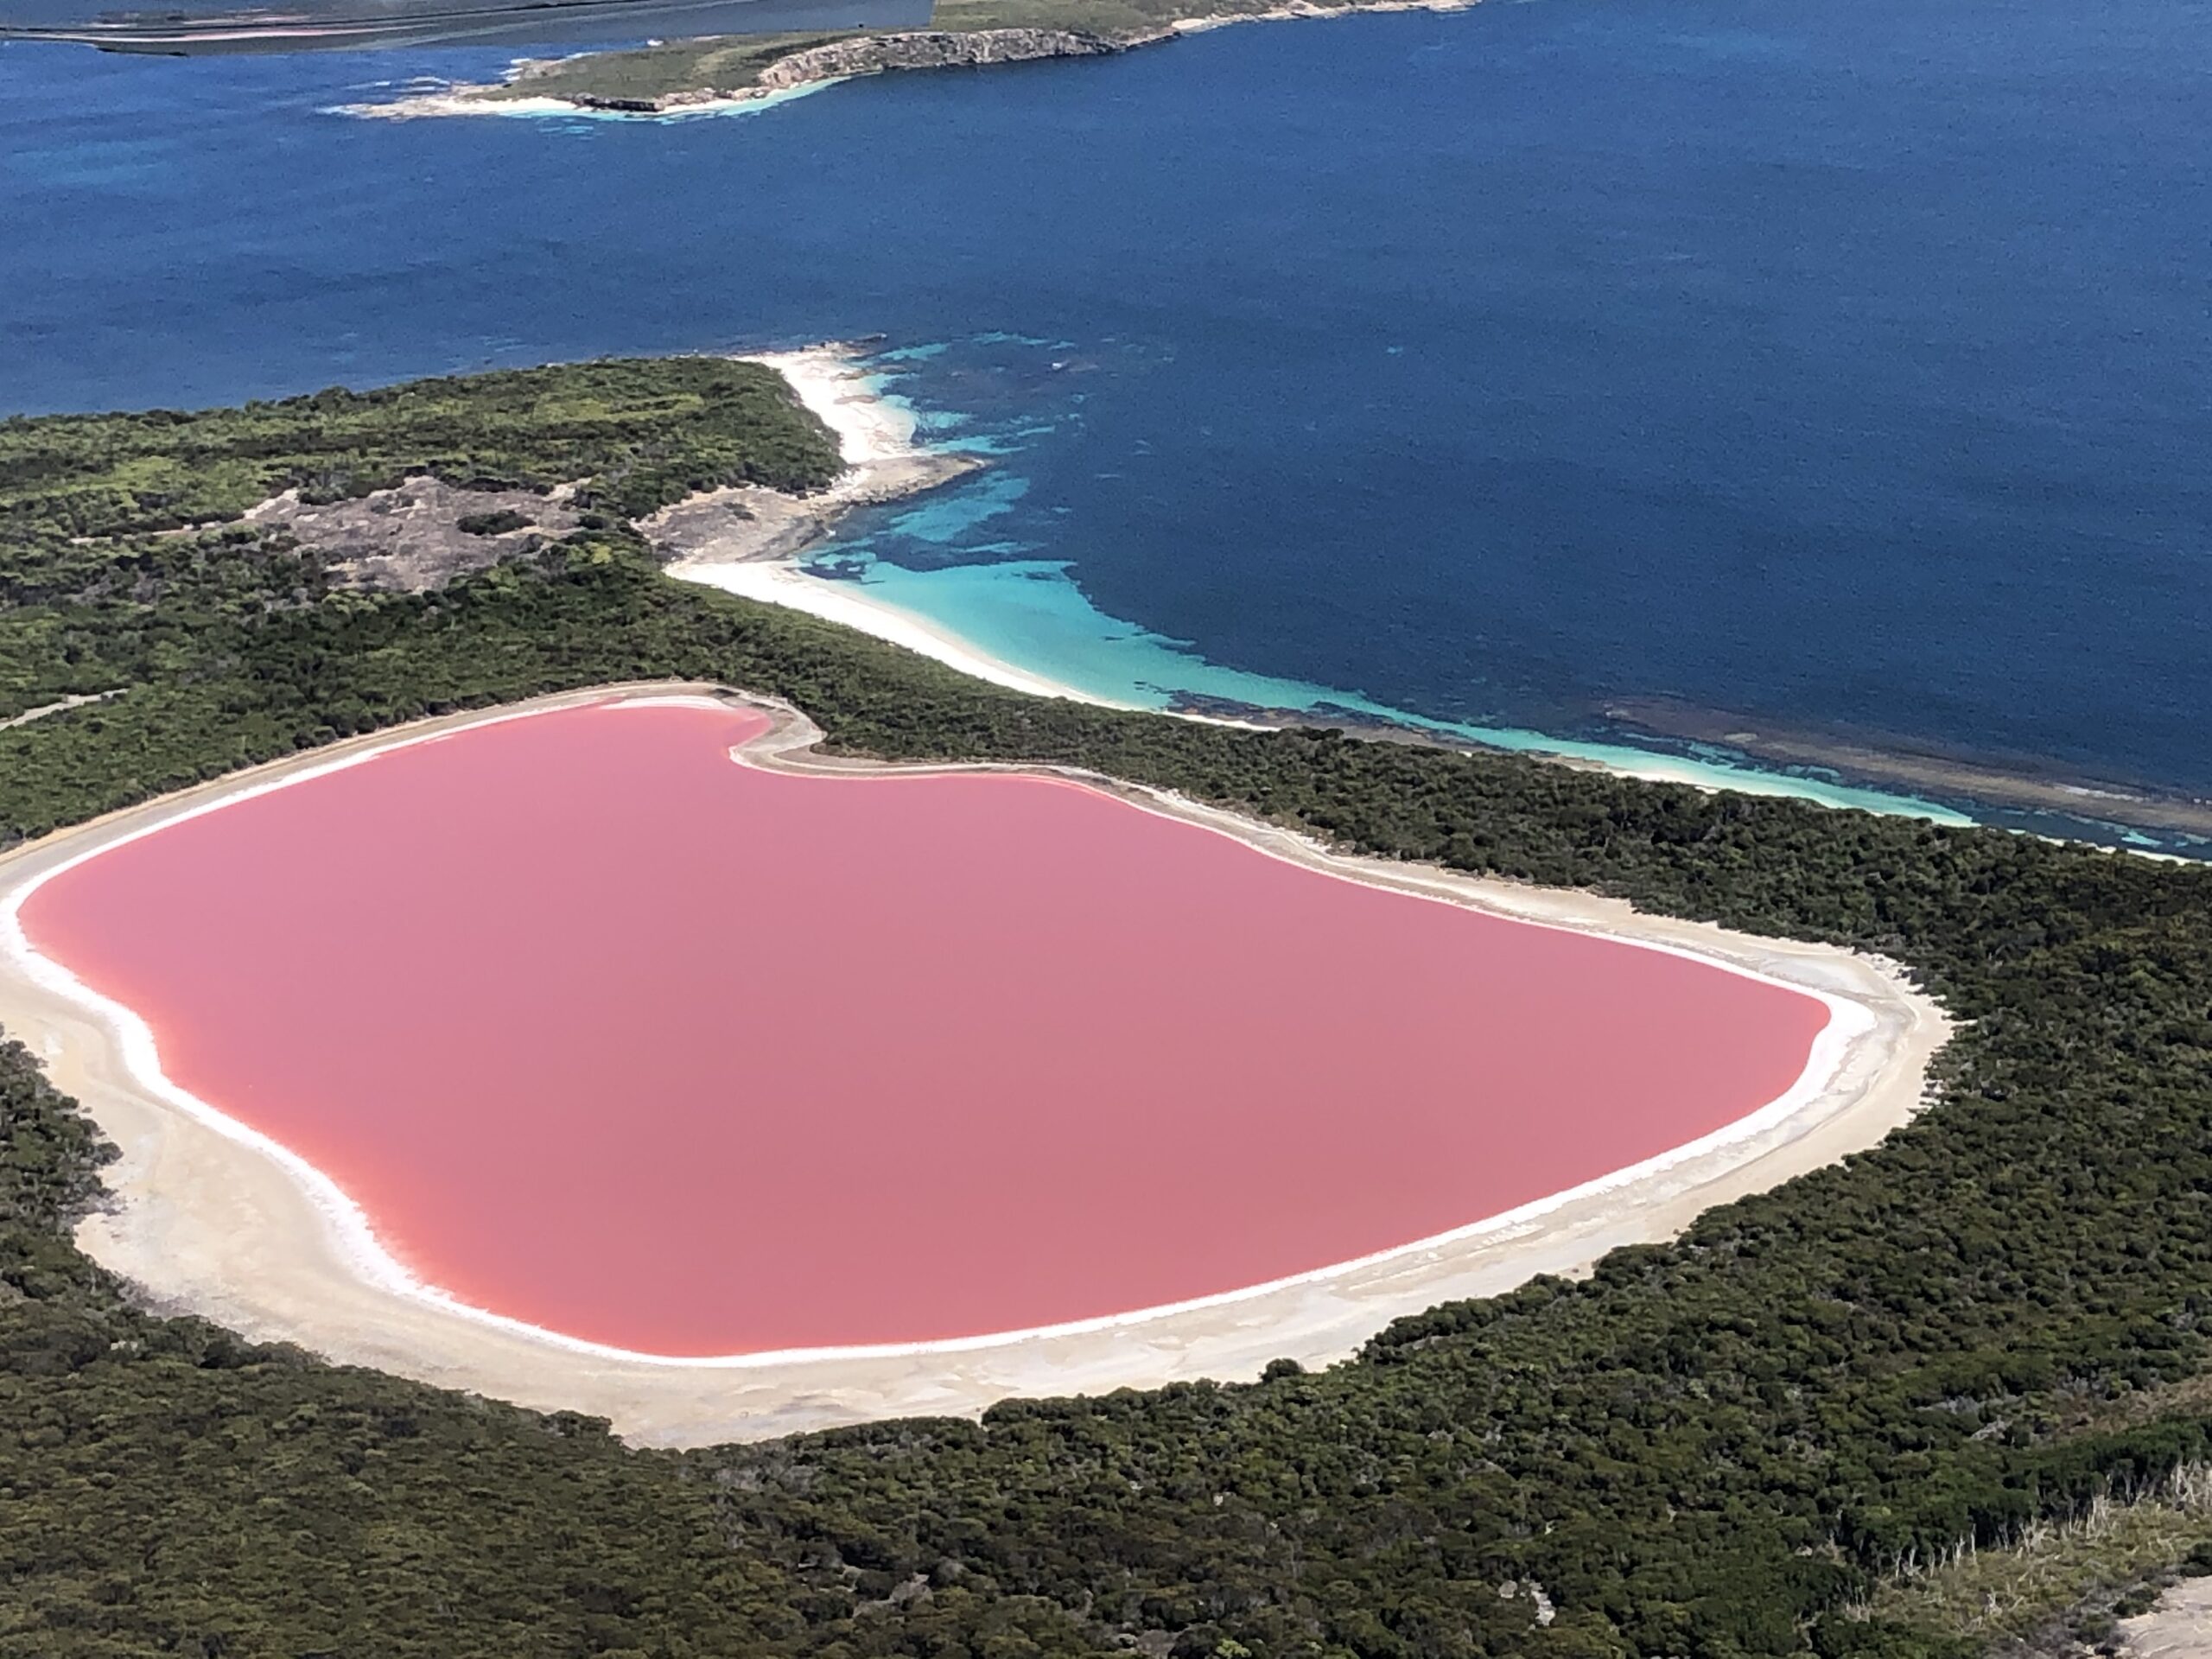 lake hillier helicopter tour price